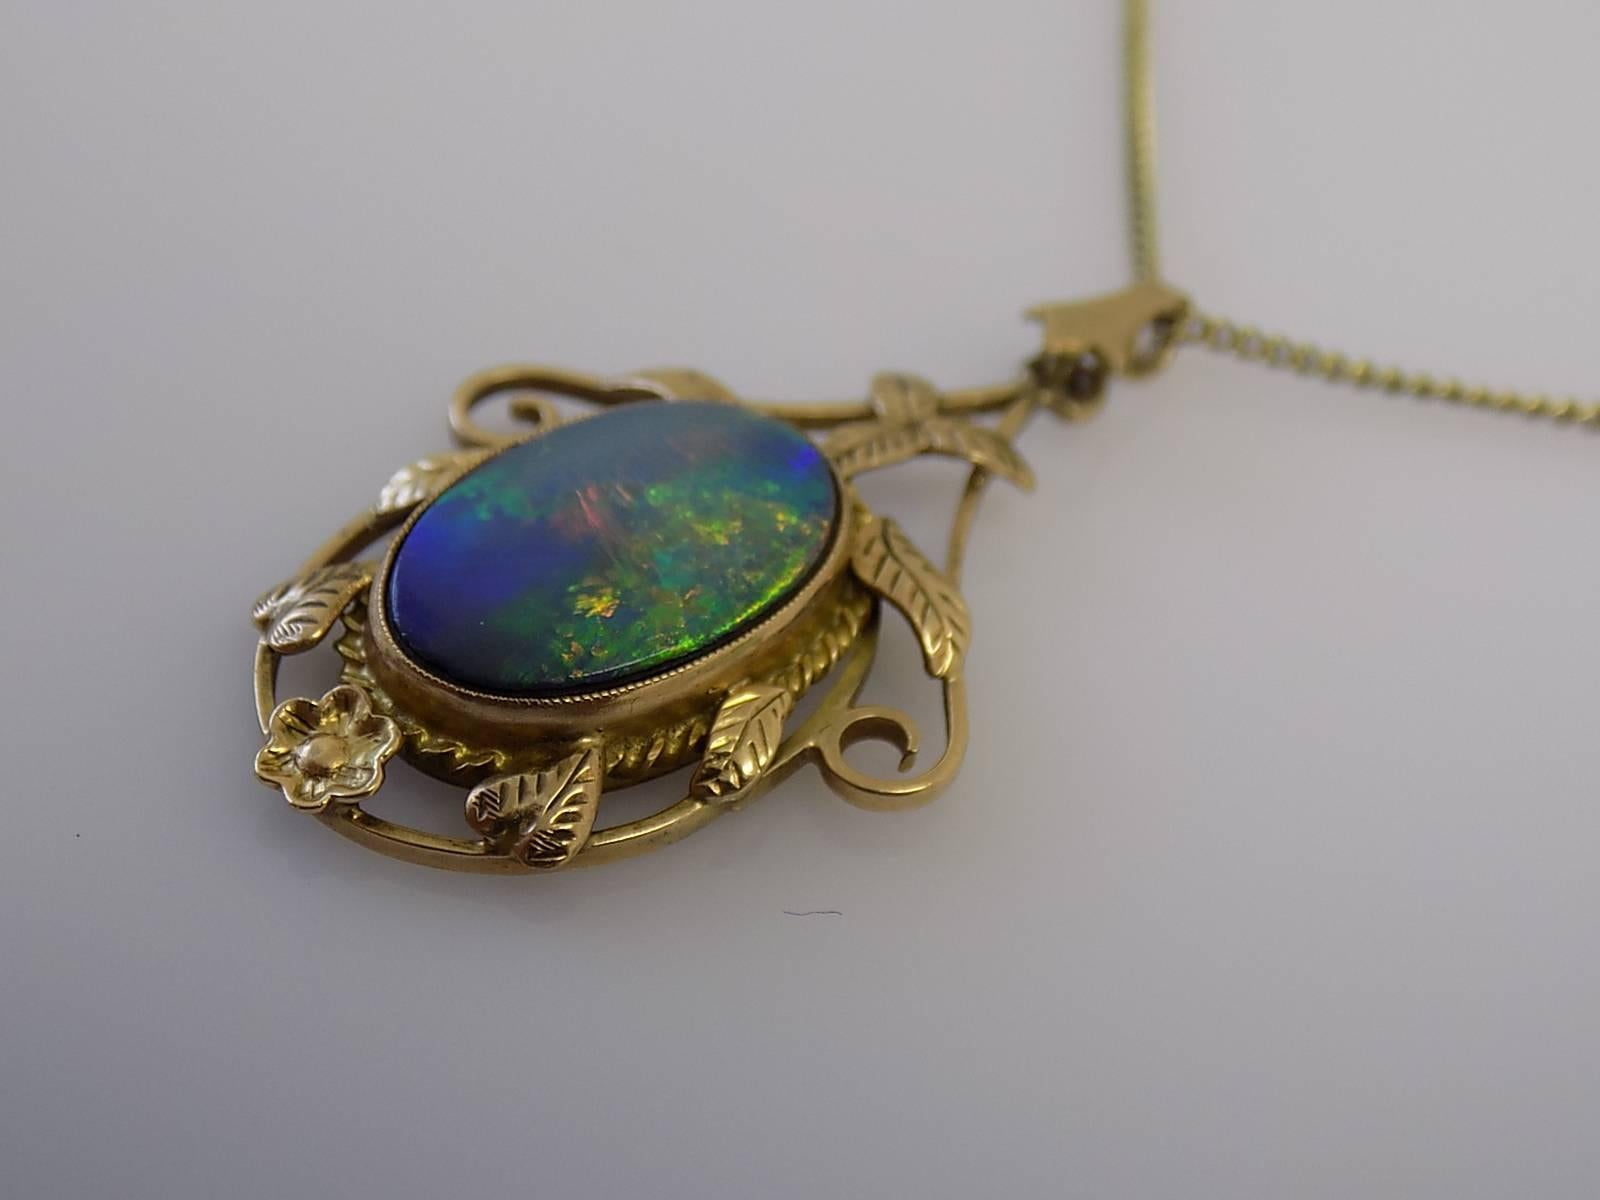 A Gorgeous early 1900s Arts & Crafts period 9 Carat Rose Gold & Doublet Black Opal pendant on a 9 Carat Yellow Gold chain. English origin.
Total drop of the pendant including bale 37mm, Width 21mm.
Opal 19mm x 10mm.
Length of the chain